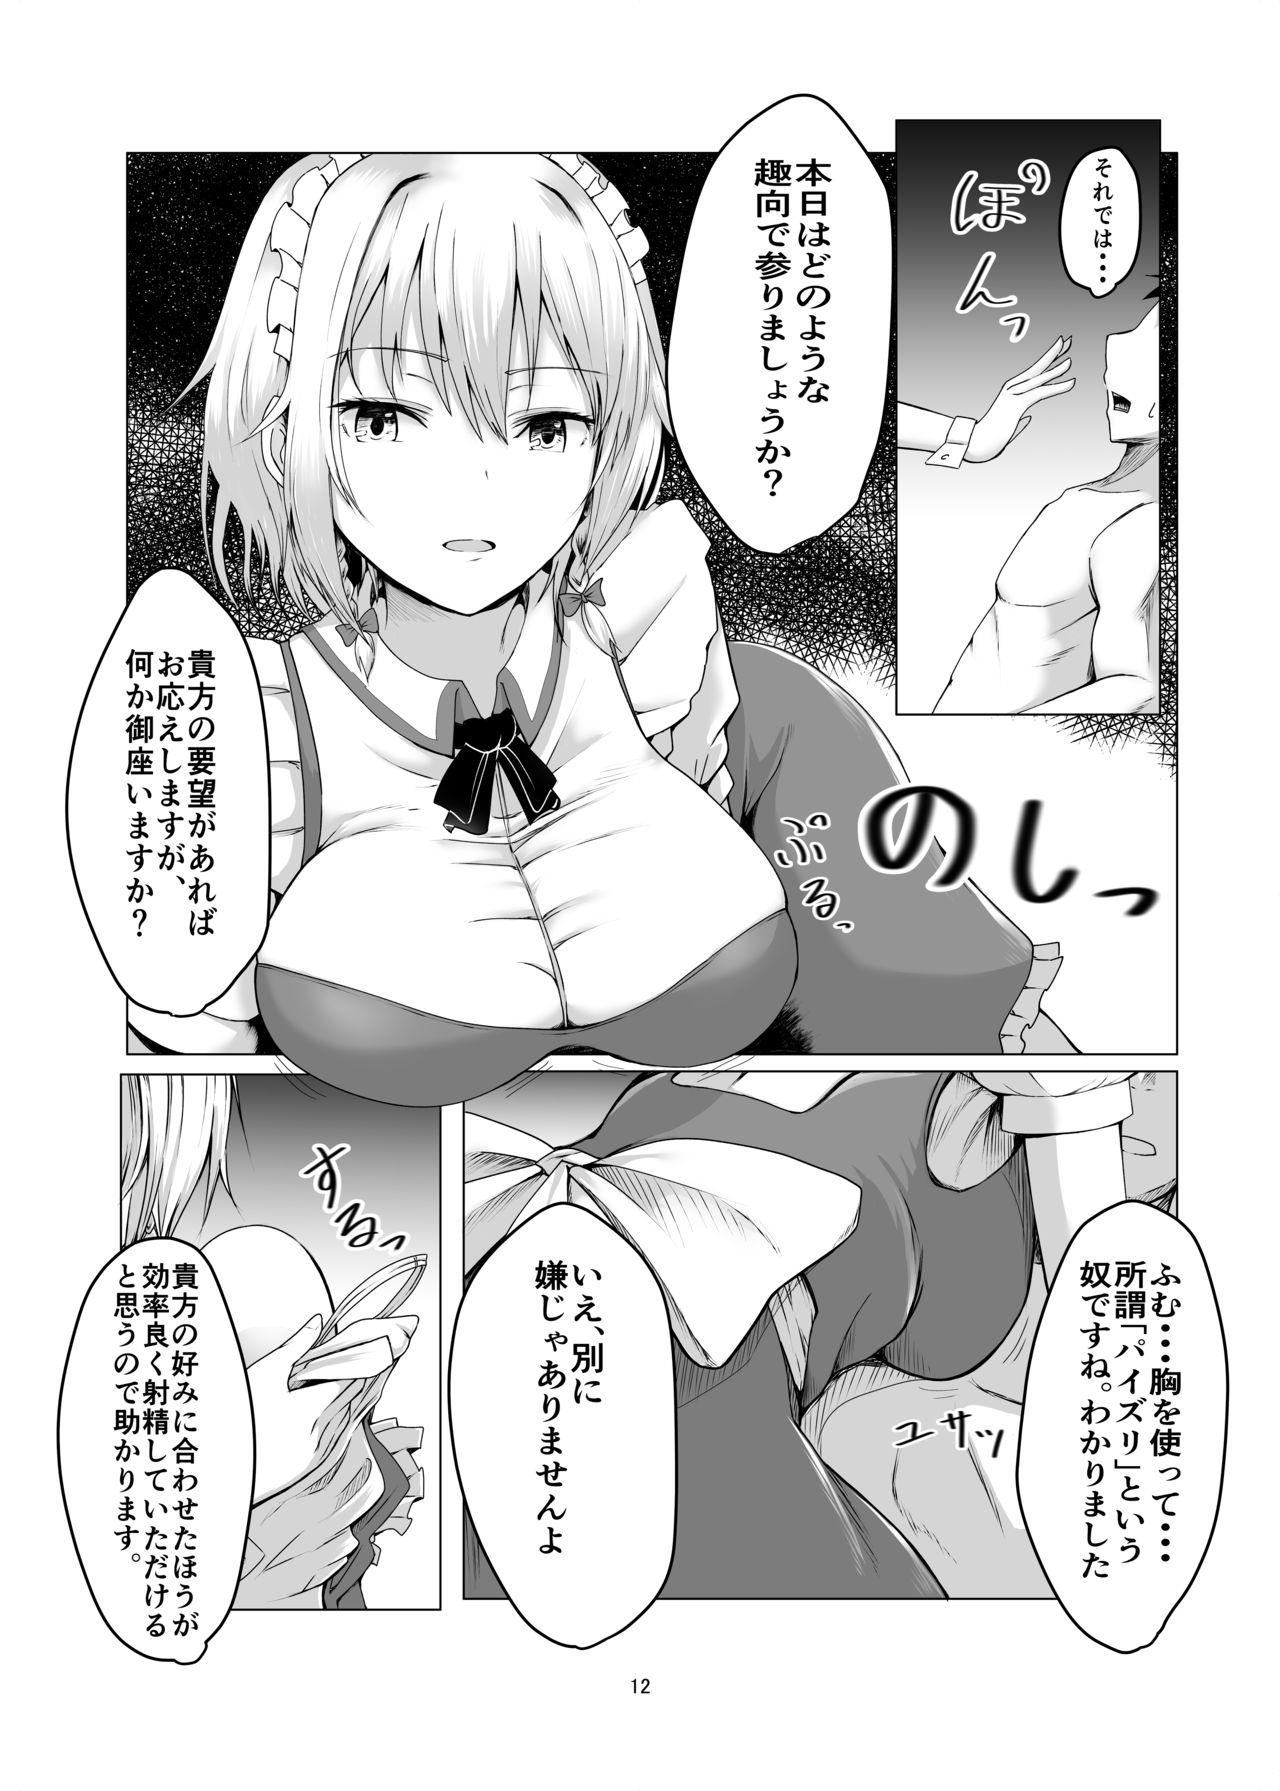 Dorm 咲夜さんに淡々と搾精されるマンガ - Touhou project Couple Porn - Page 11